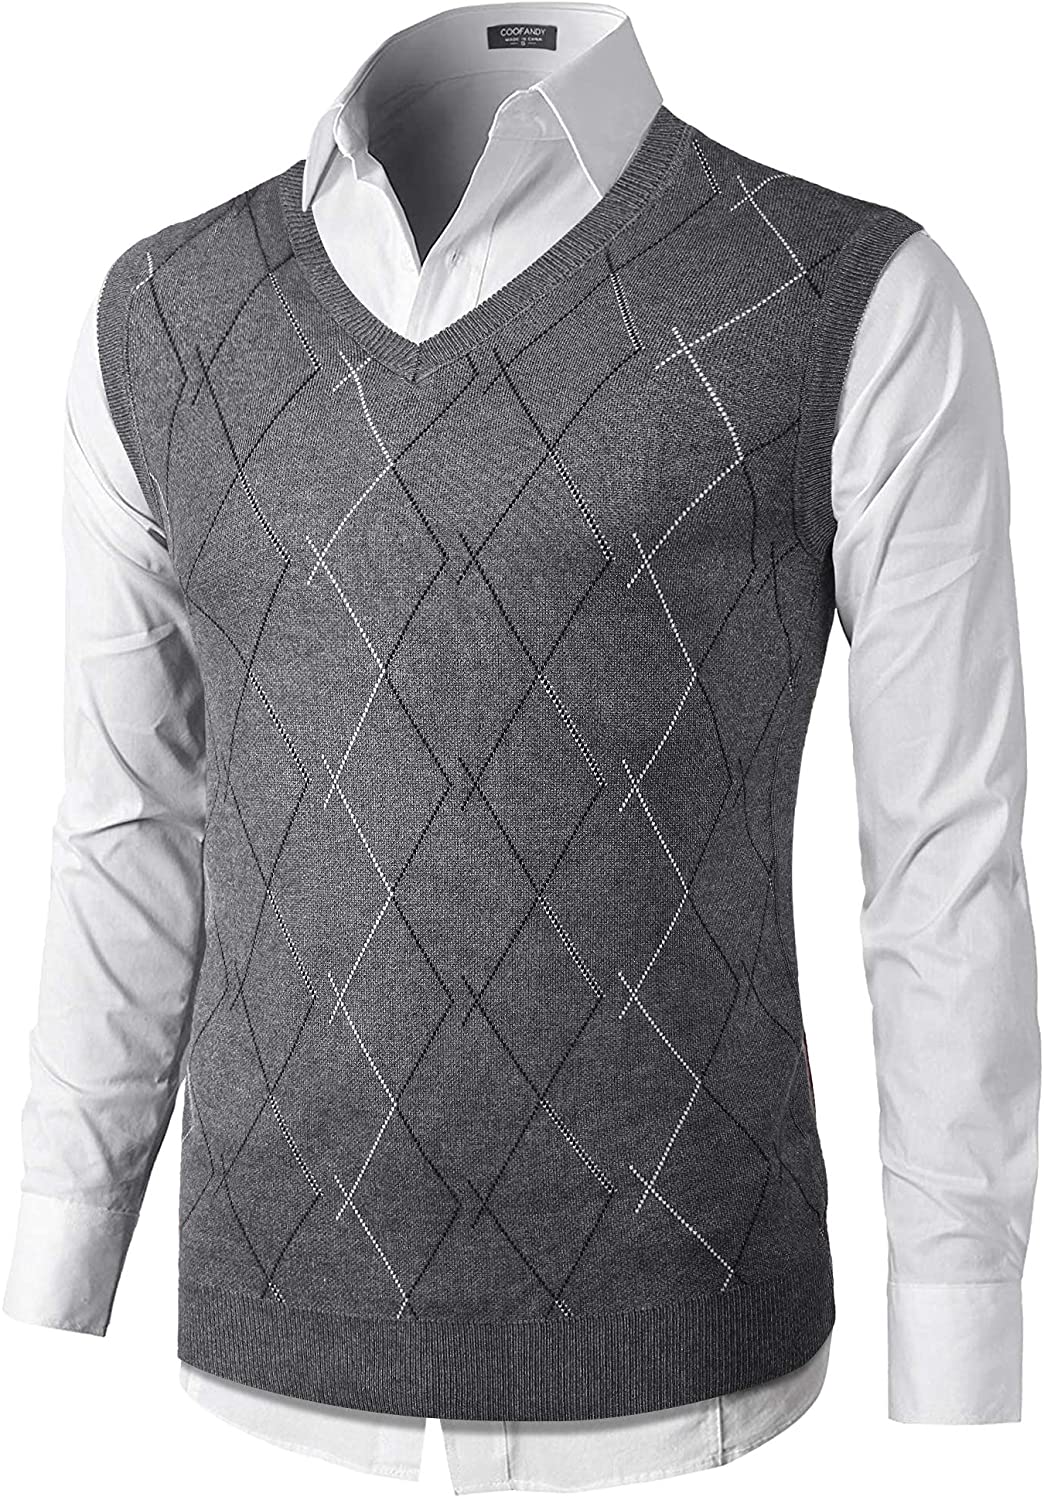 COOFANDY Mens Casual Slim Fit V Neck Knit Sweater Vest Sleeveless Pullover Sweaters Vest 